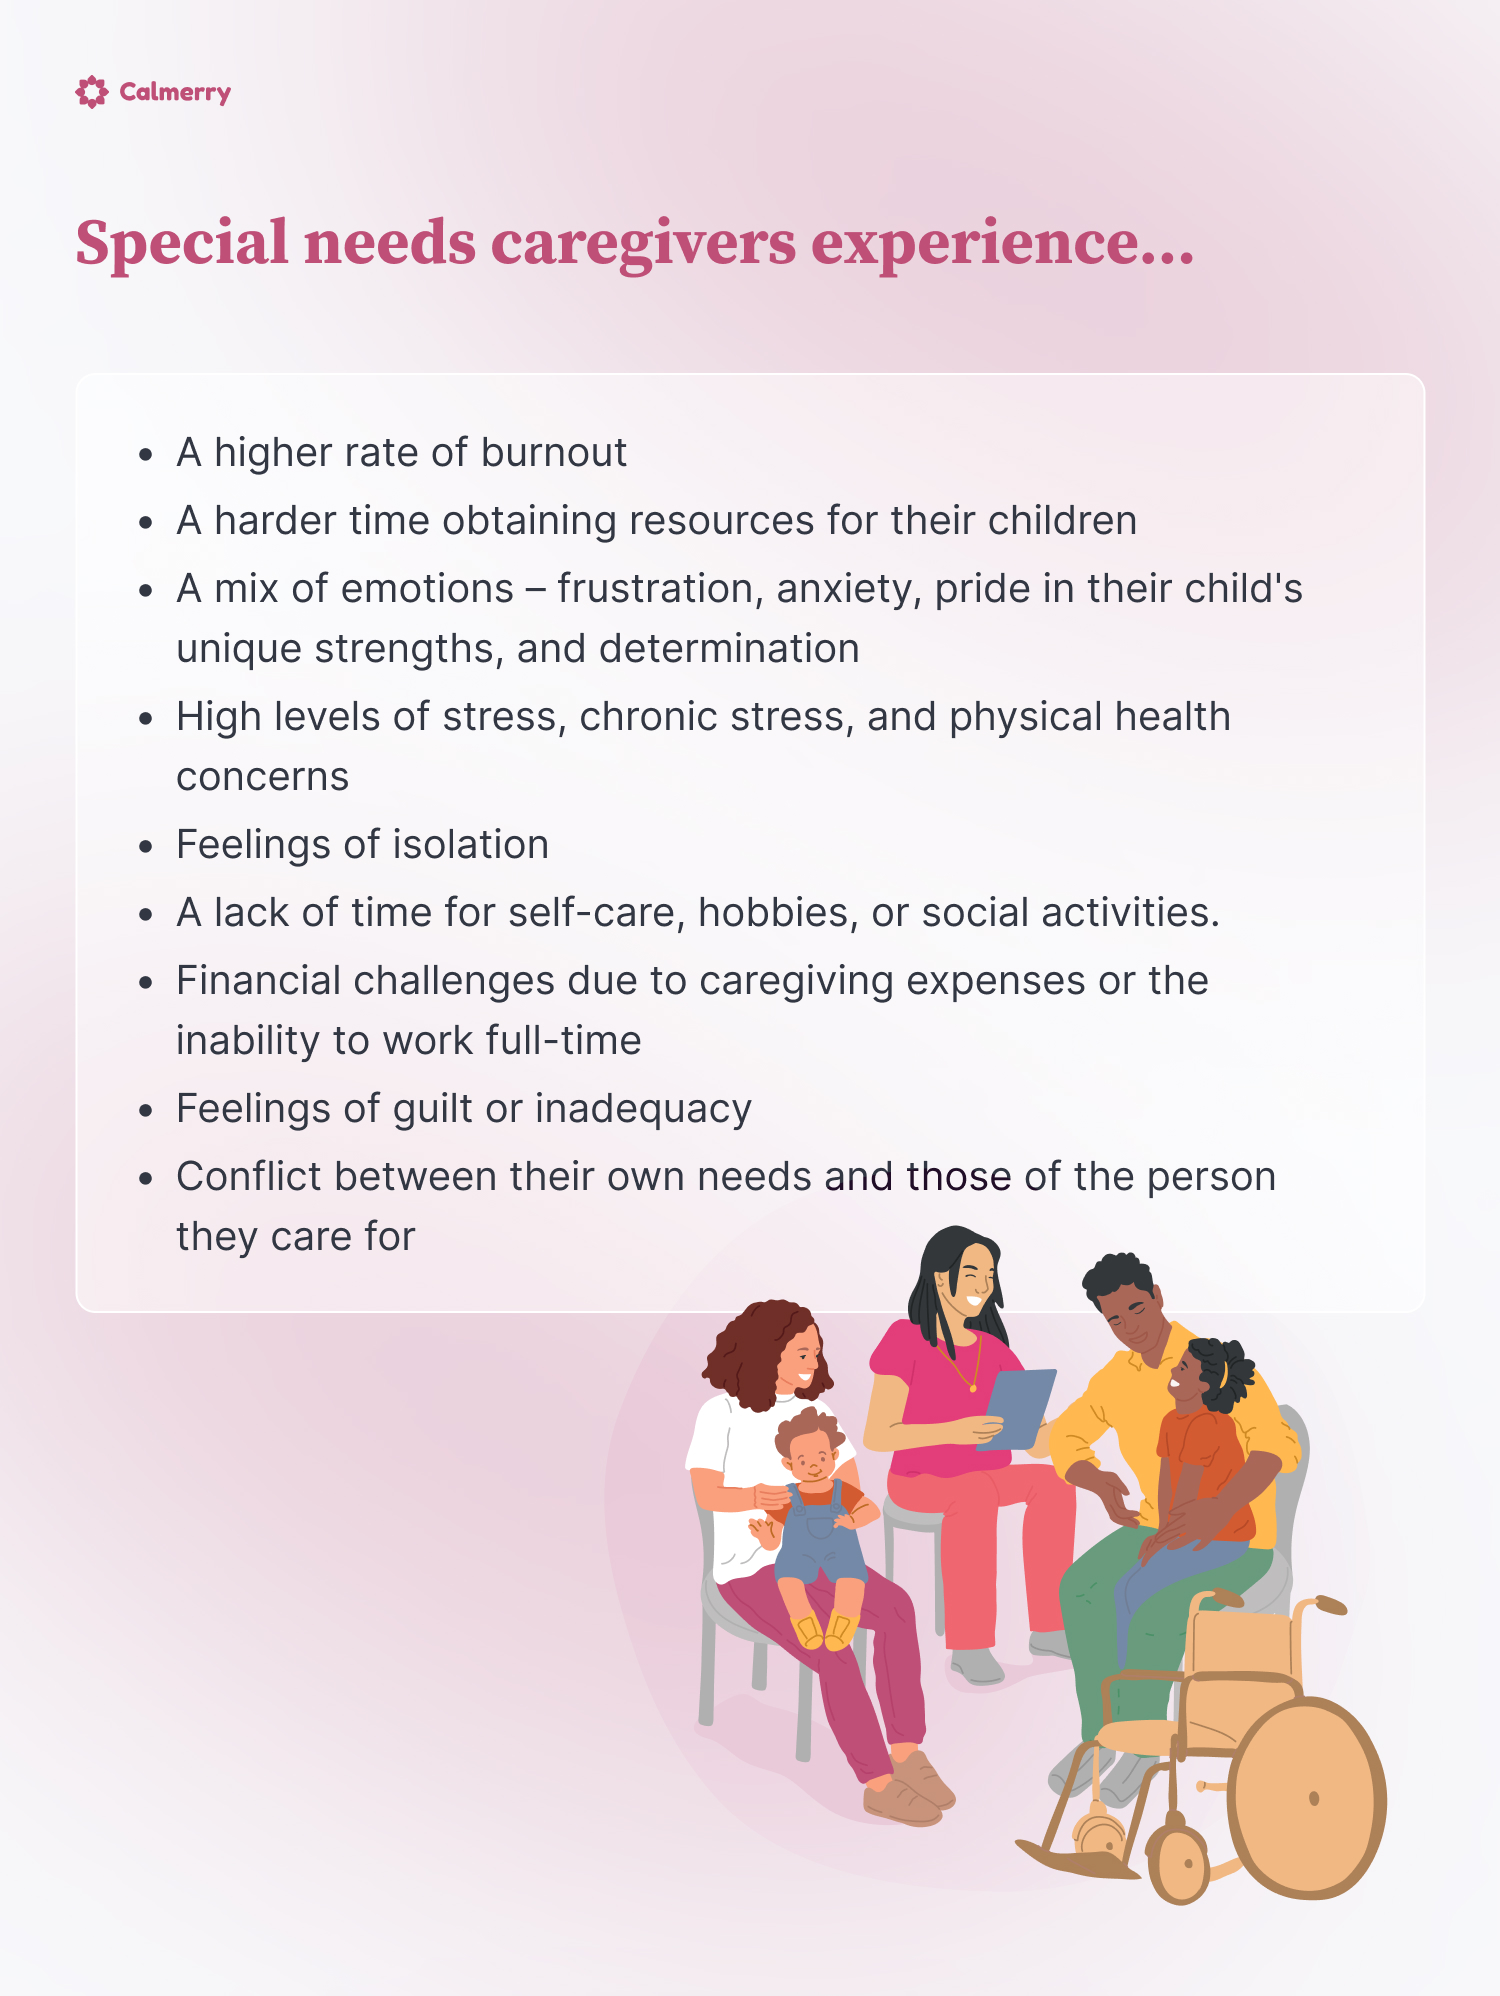 Special needs caregivers experience…
A higher rate of burnout
A harder time obtaining resources for their children
A mix of emotions – frustration, anxiety, pride in their child's unique strengths, and determination 
High levels of stress, chronic stress, and physical health concerns
Feelings of isolation
A lack of time for self-care, hobbies, or social activities. 
Financial challenges due to caregiving expenses or the inability to work full-time 
Feelings of guilt or inadequacy
Conflict between their own needs and those of the person they care for
